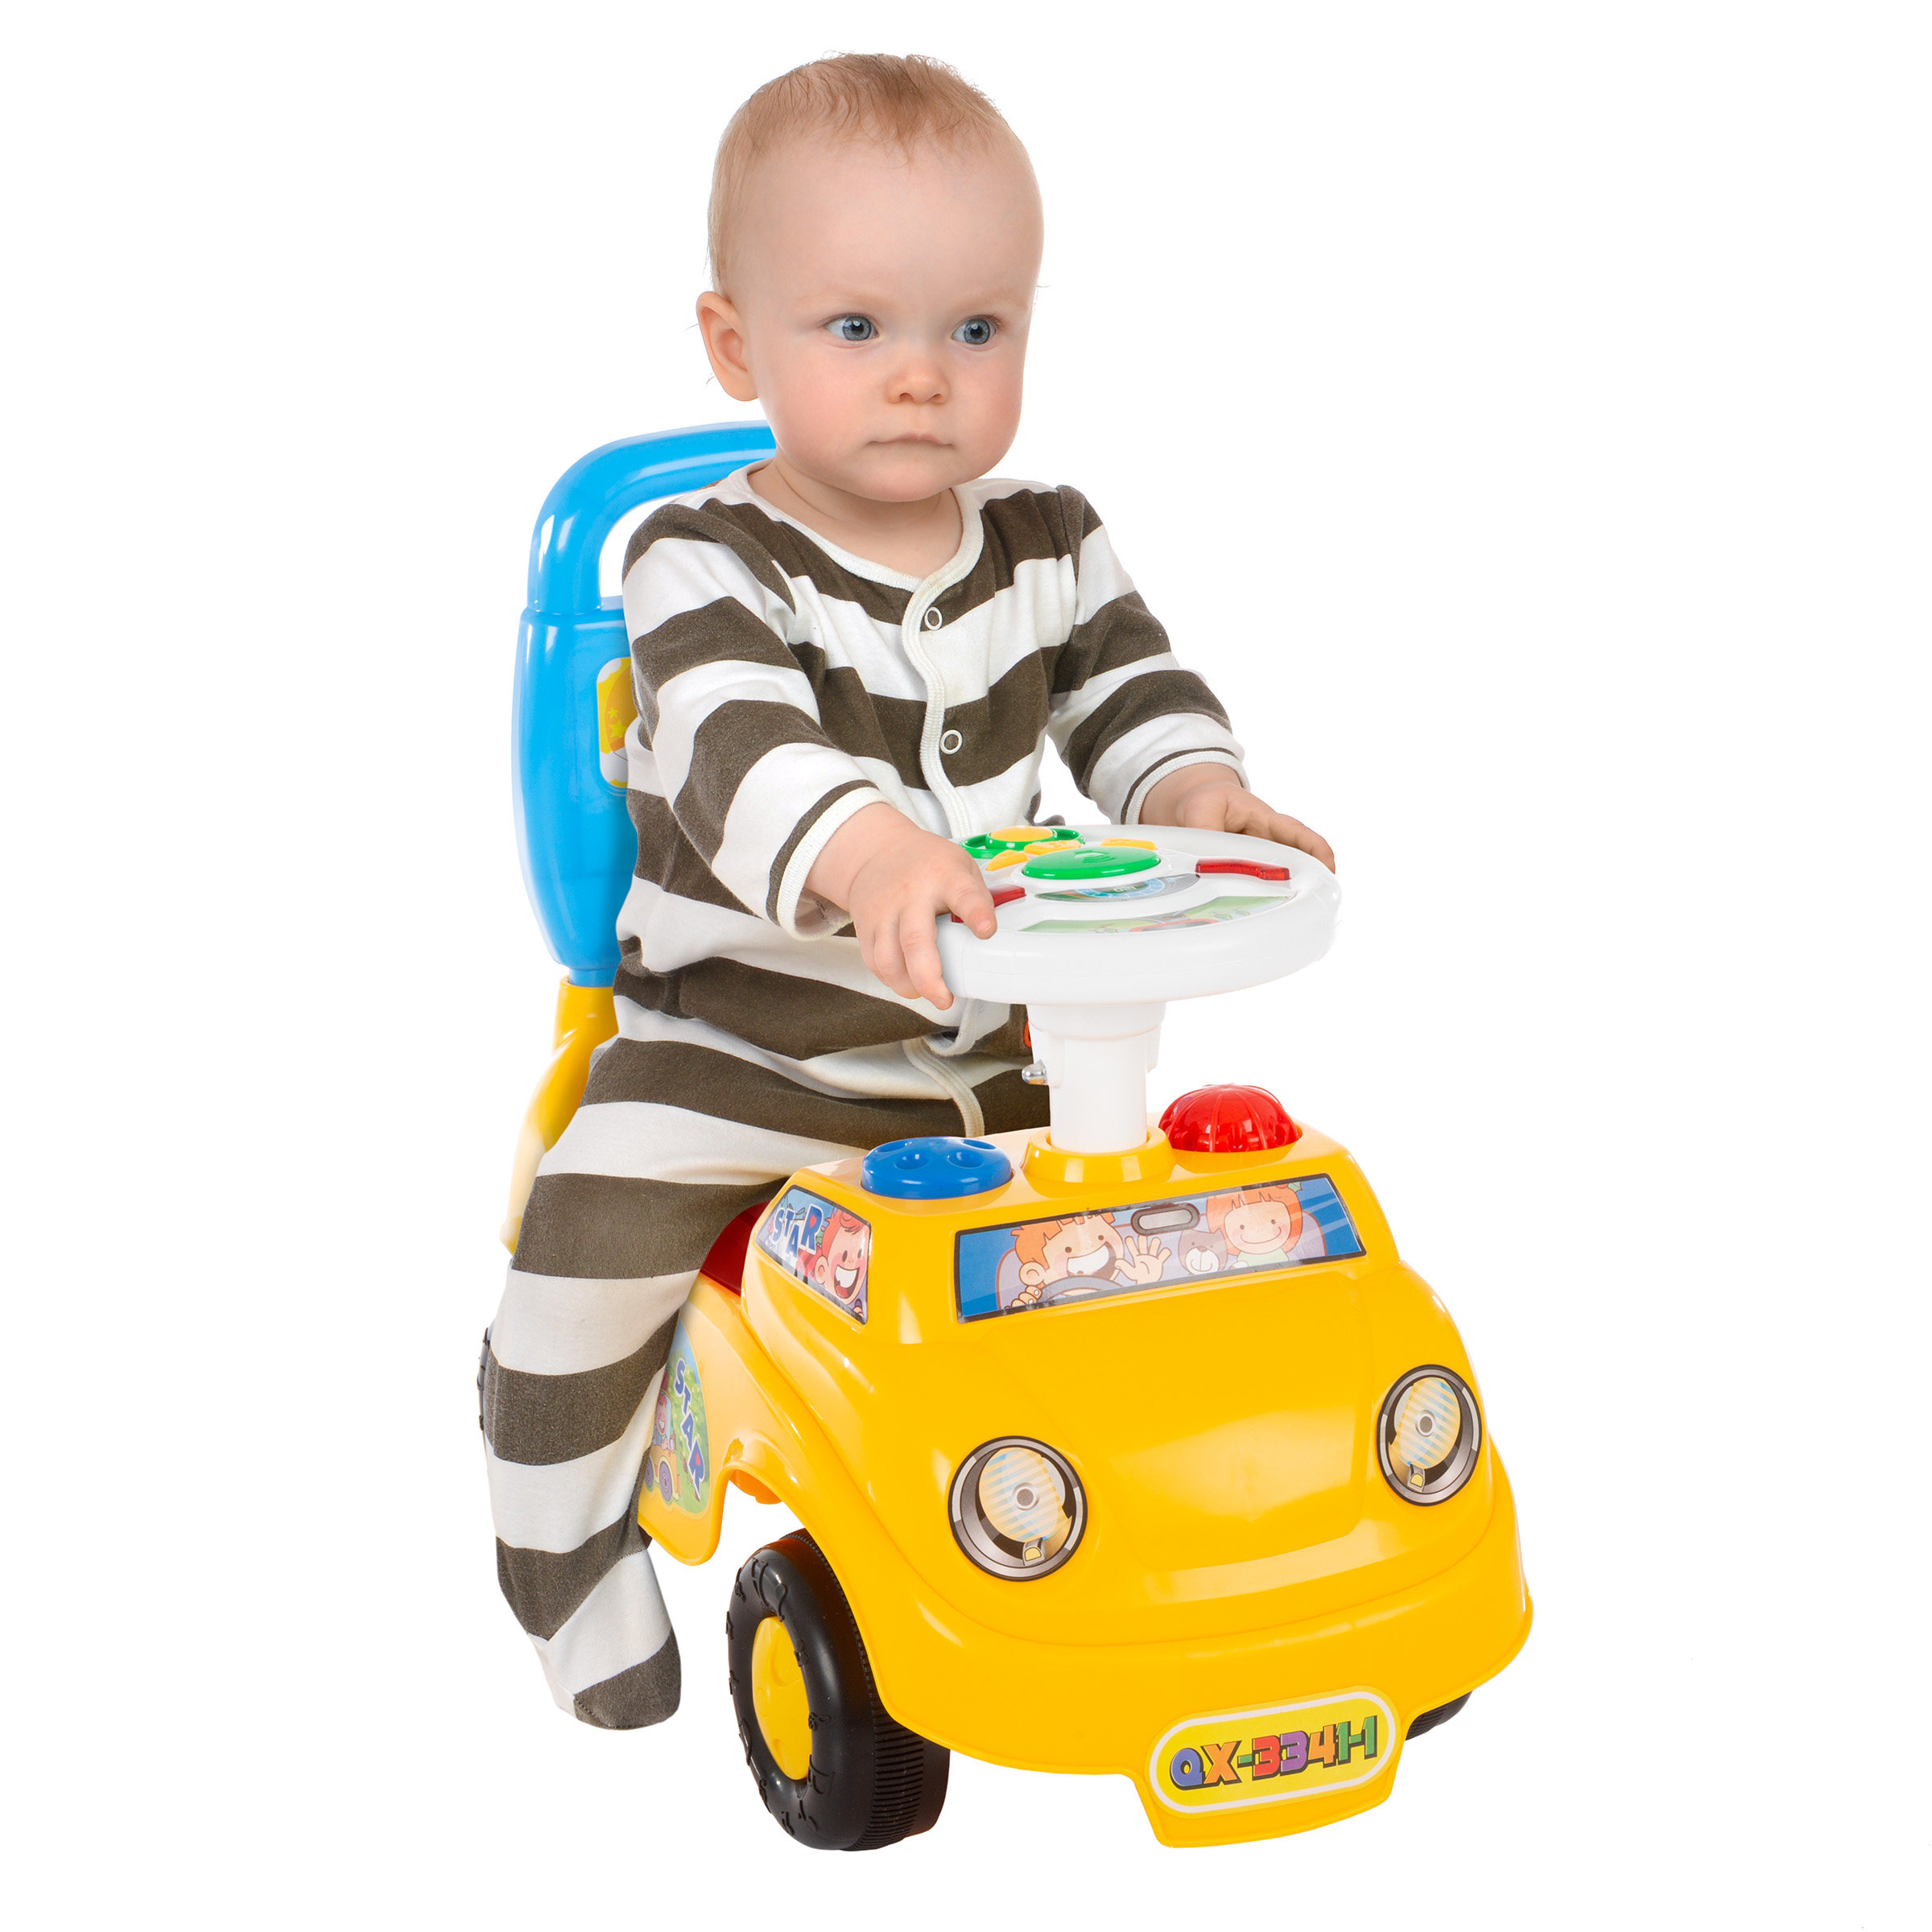 Baby Walking Riding Activity Car Scoot Or Walk Behind Lights Sounds 10 - 30 Months Toddlers